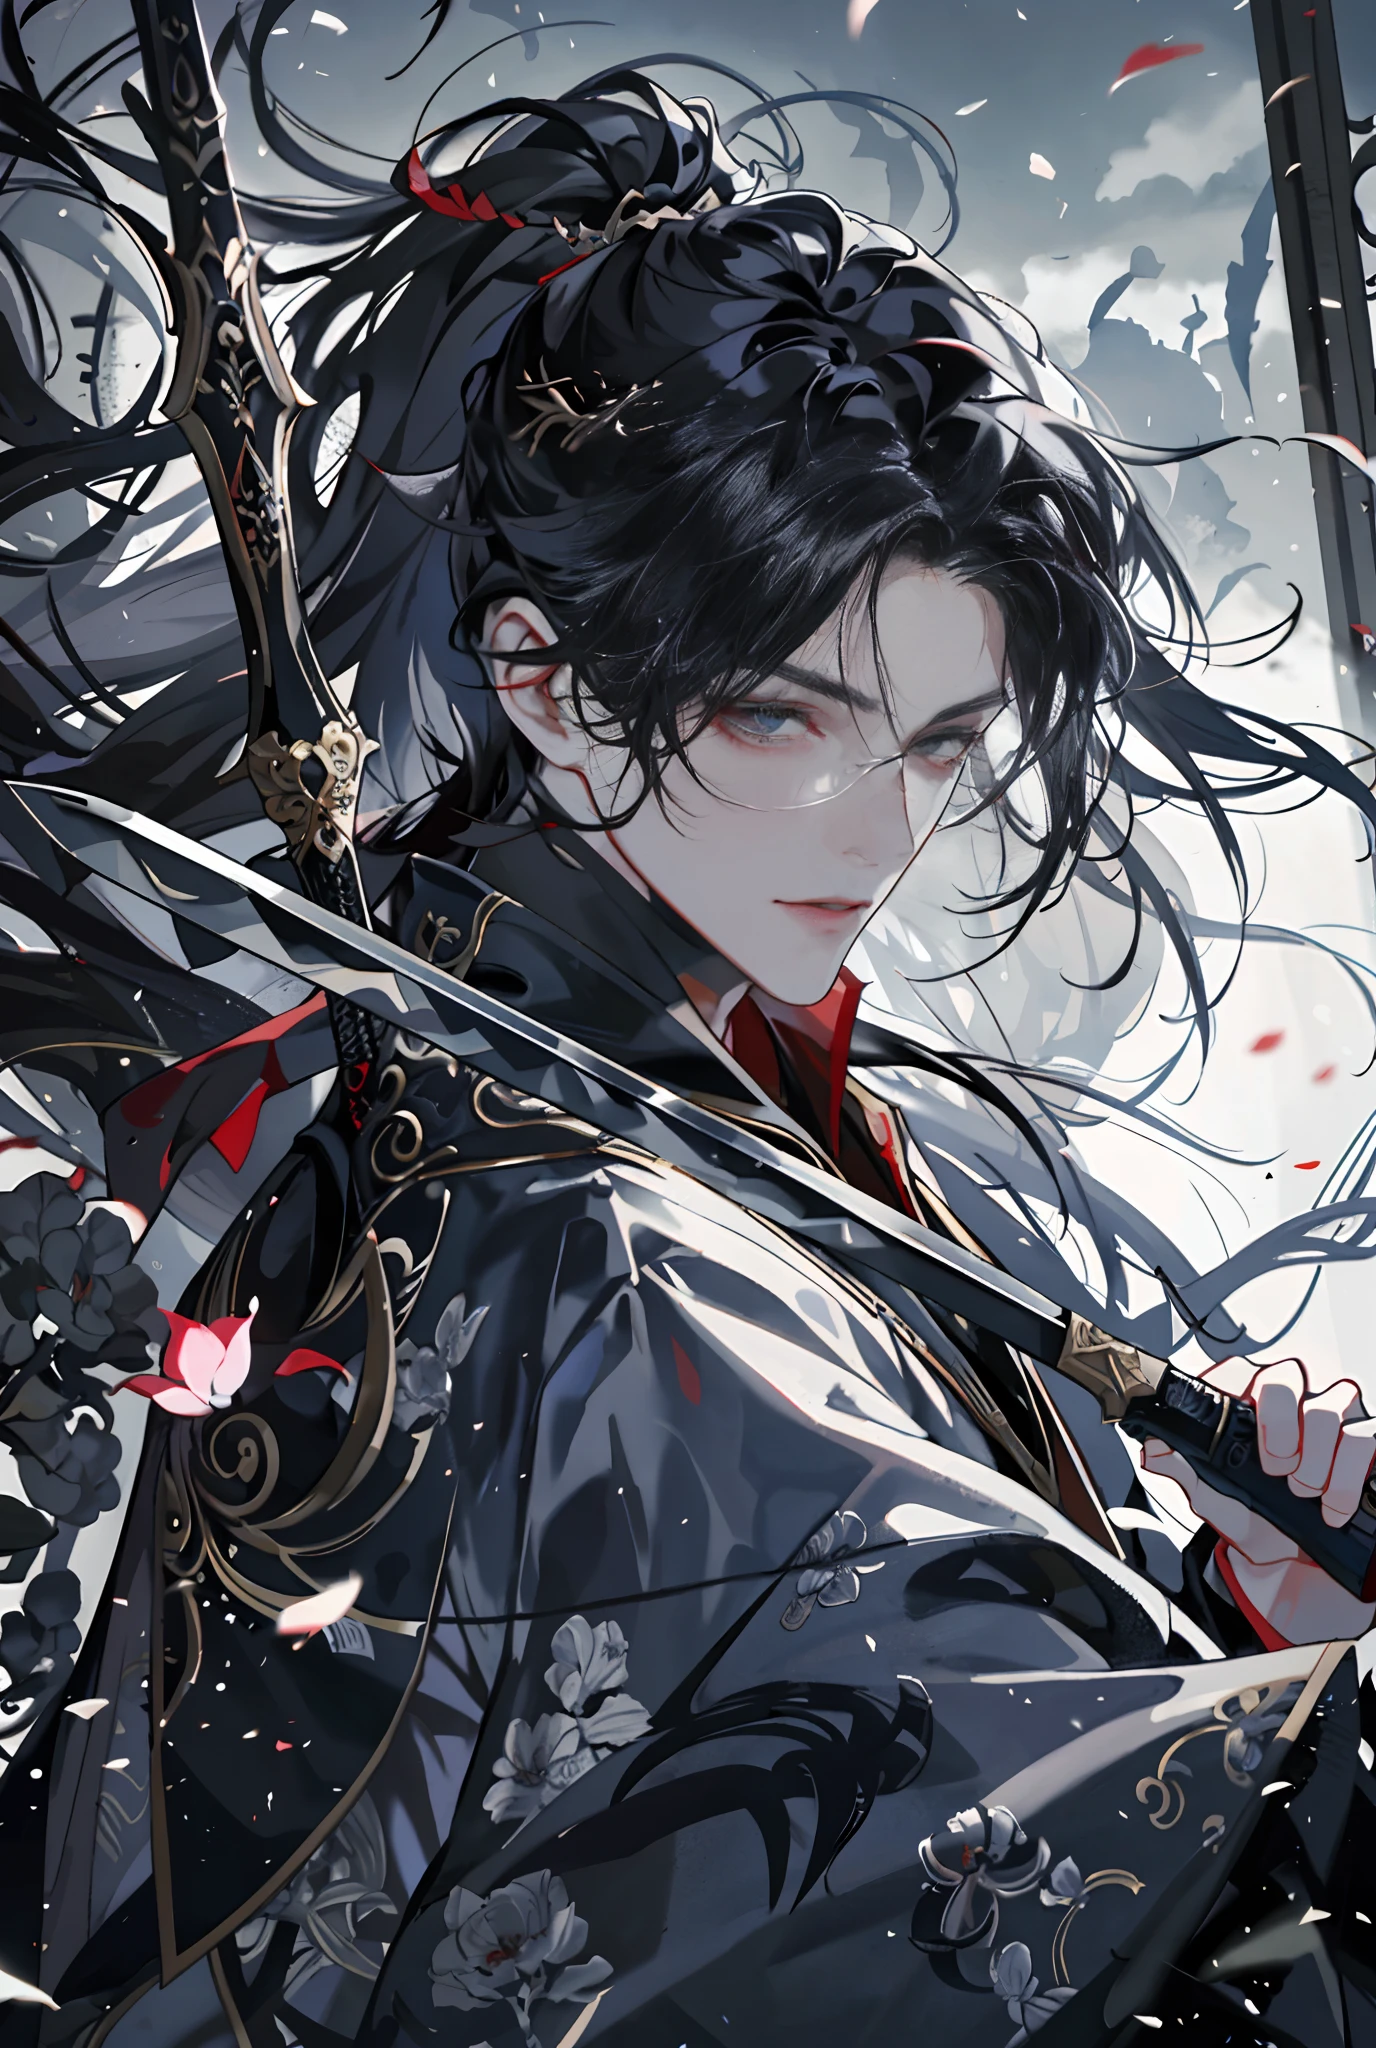 He wears a black and red robe with Tai Chi on it，Messy hair，Broken hair，long whitr hair，knight-errant，Very beautiful cyberpunk digital artwork，malefocus，Handsome，heroic look，Holding a knife in his hand，Chivalry style，High-quality detailed depiction，In the background, there is a Chinese palace and a mountain forest surrounded by a soft mist，Shoot sideways，The light and shadow change is extremely exquisite。Anime style 4K wallpaper。